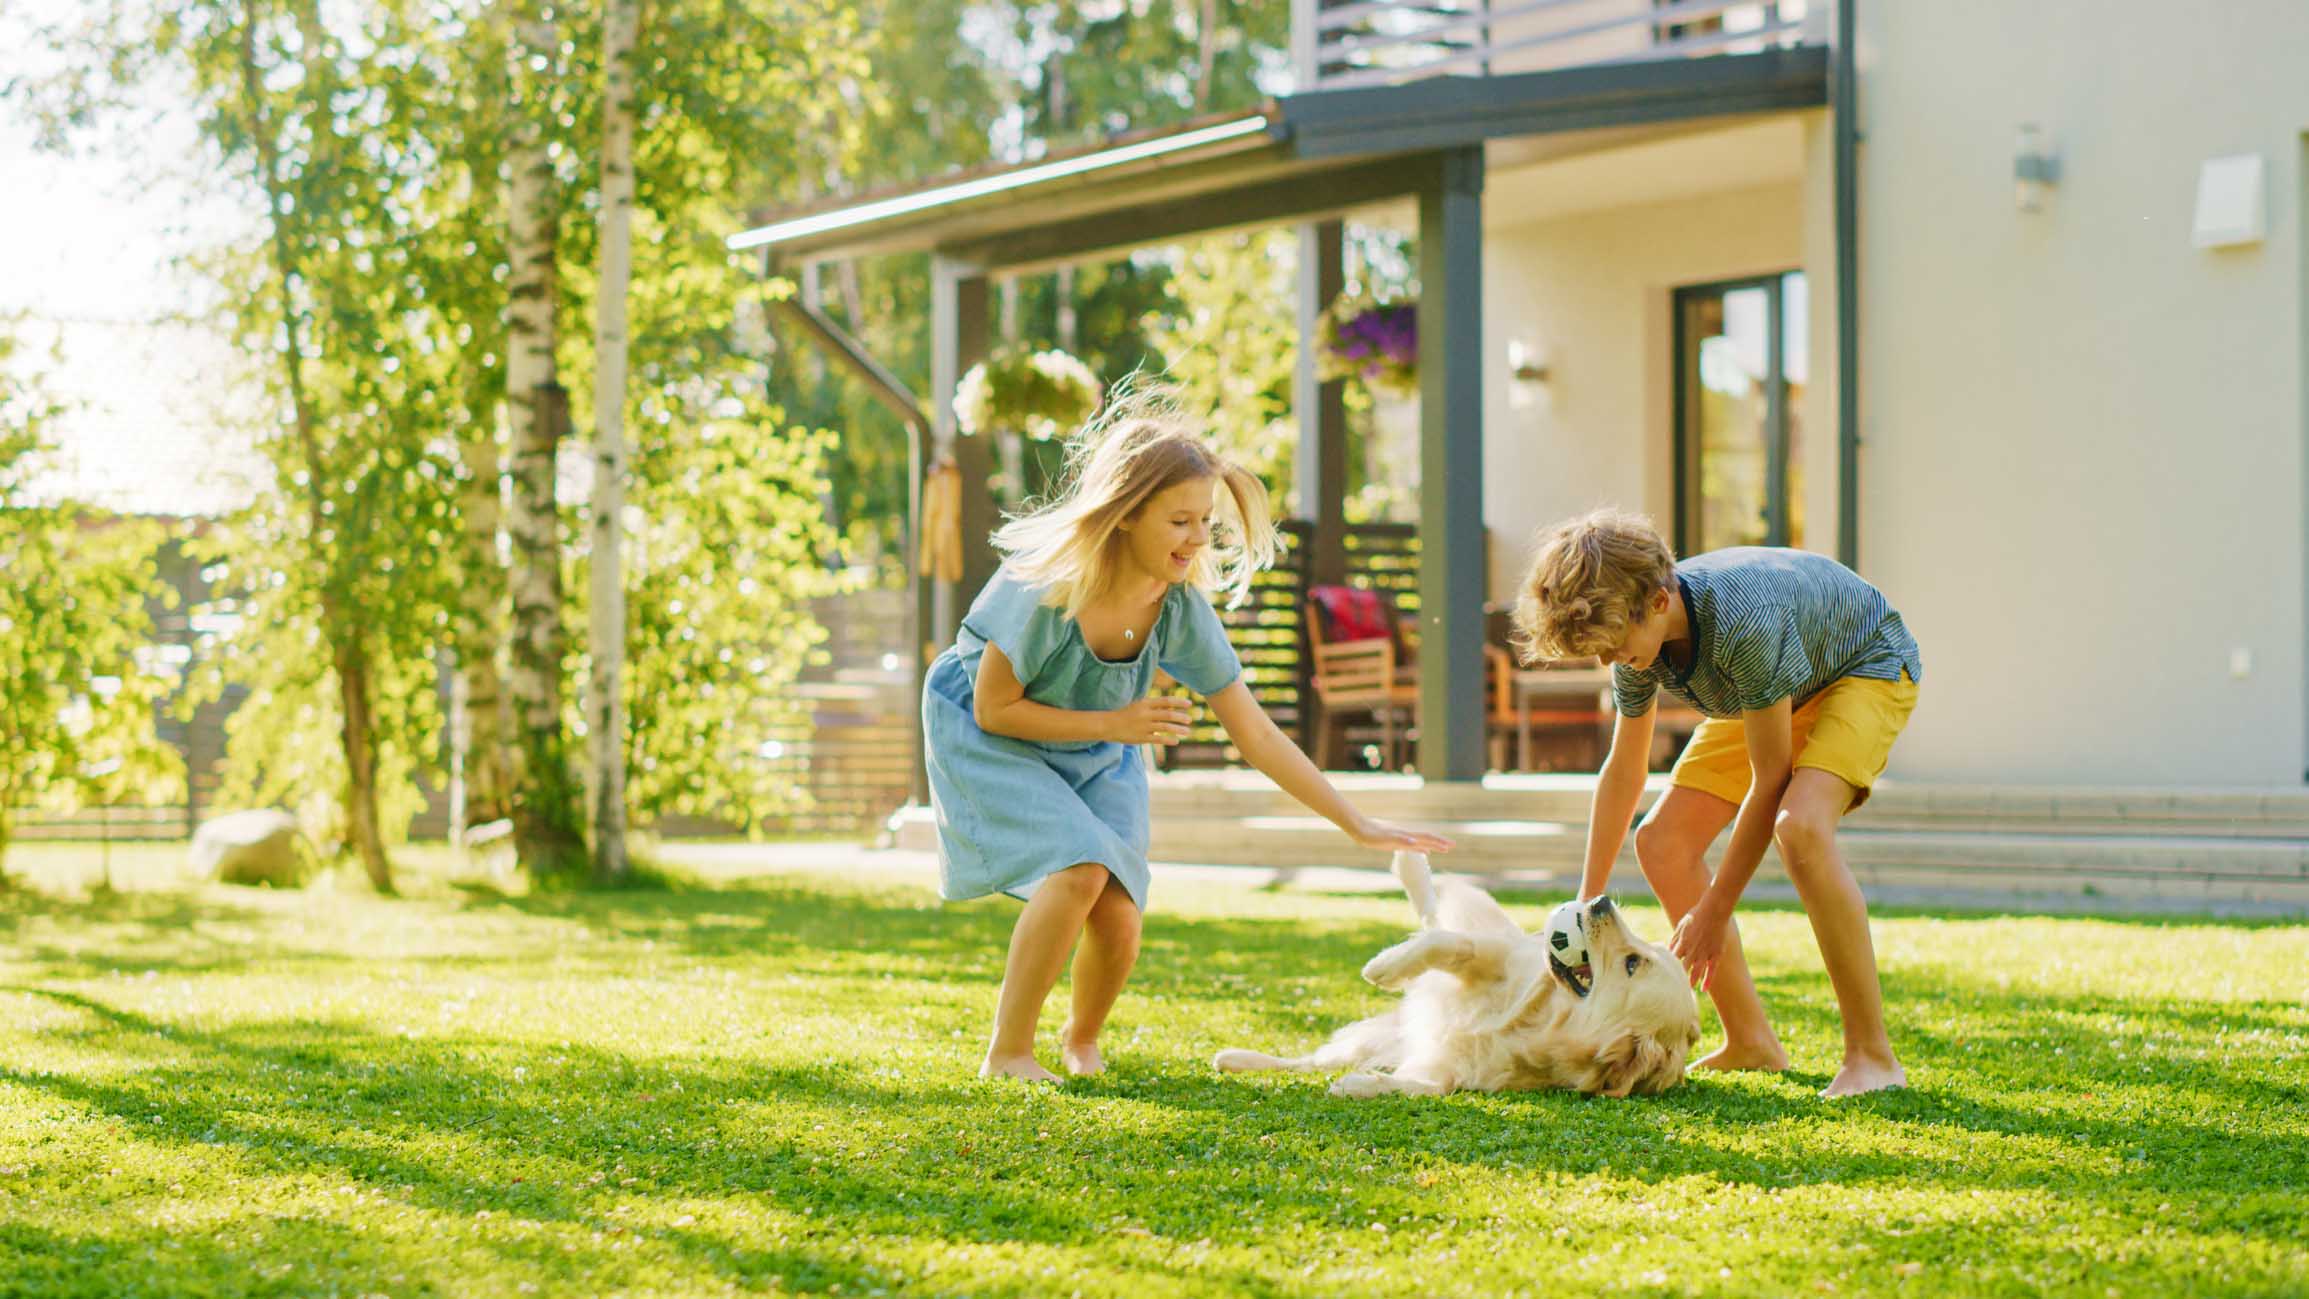 Children playing in their backyard with the family's dog.